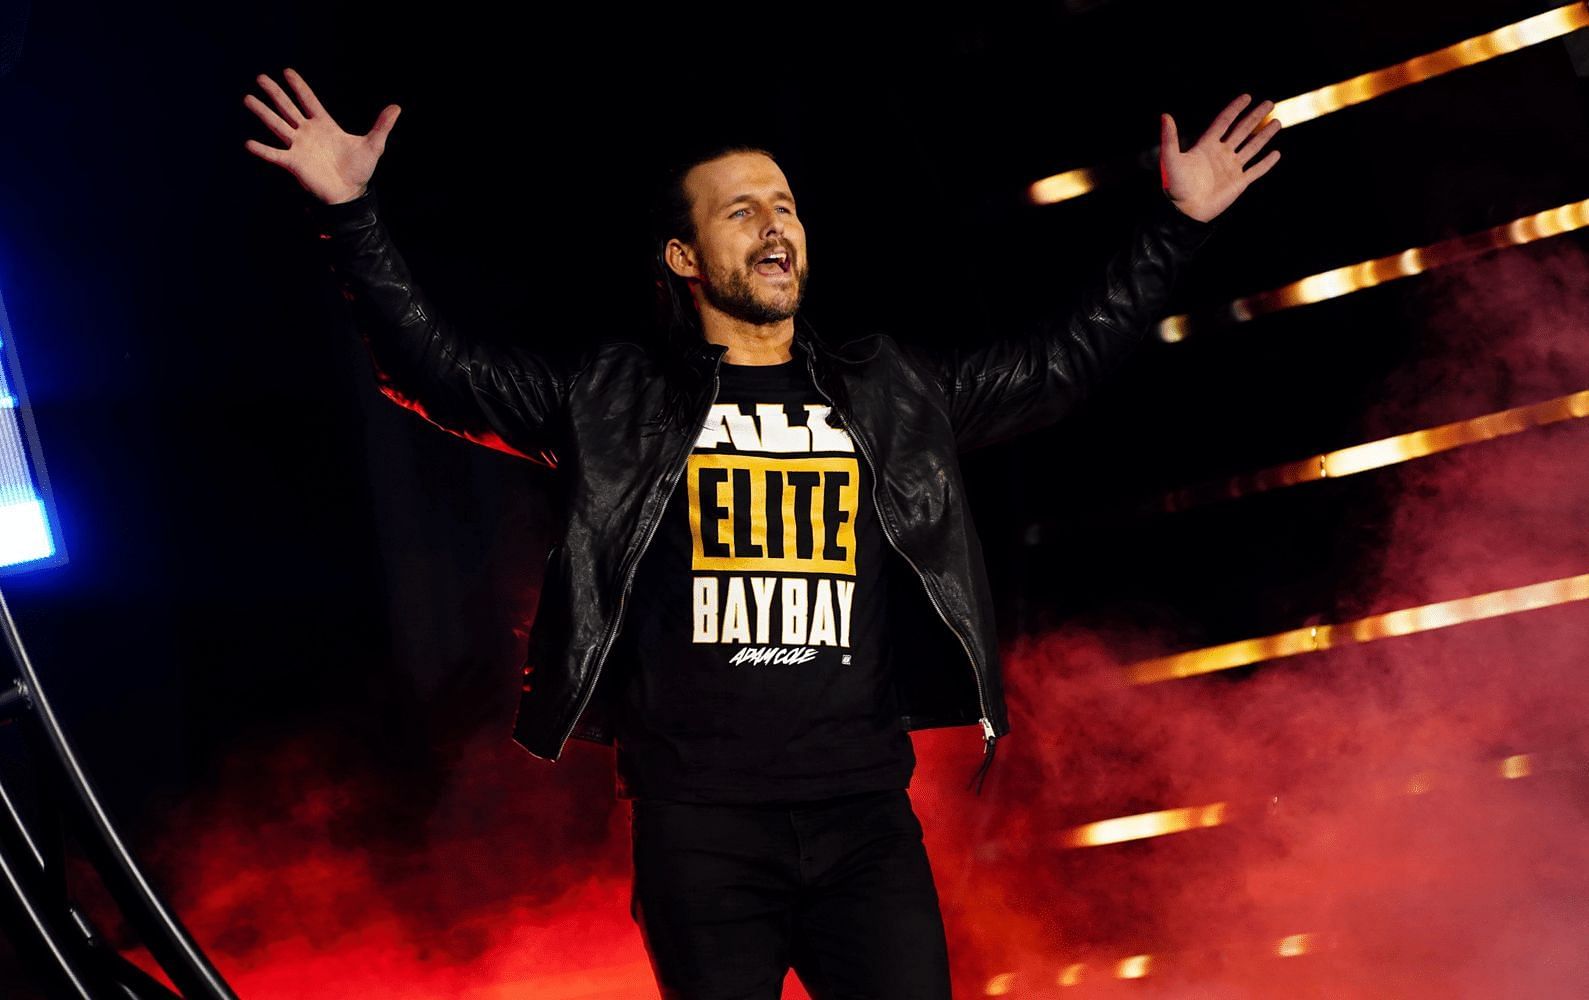 Adam Cole believes this former WWE Superstar made the best decision.